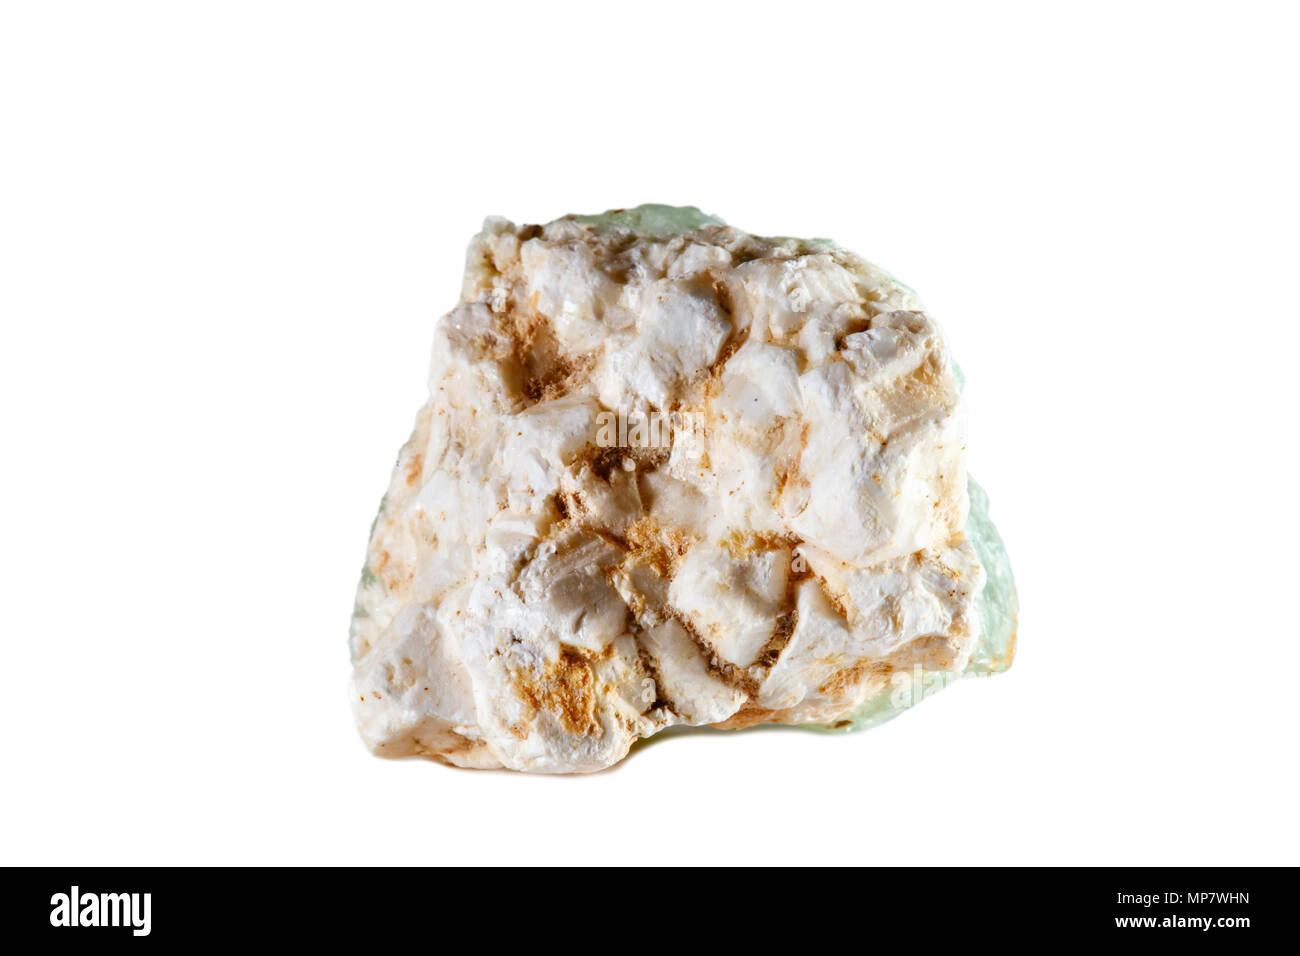 Macro shooting of natural gemstone. The raw mineral is prehnite. Isolated object on a white background. Stock Photo